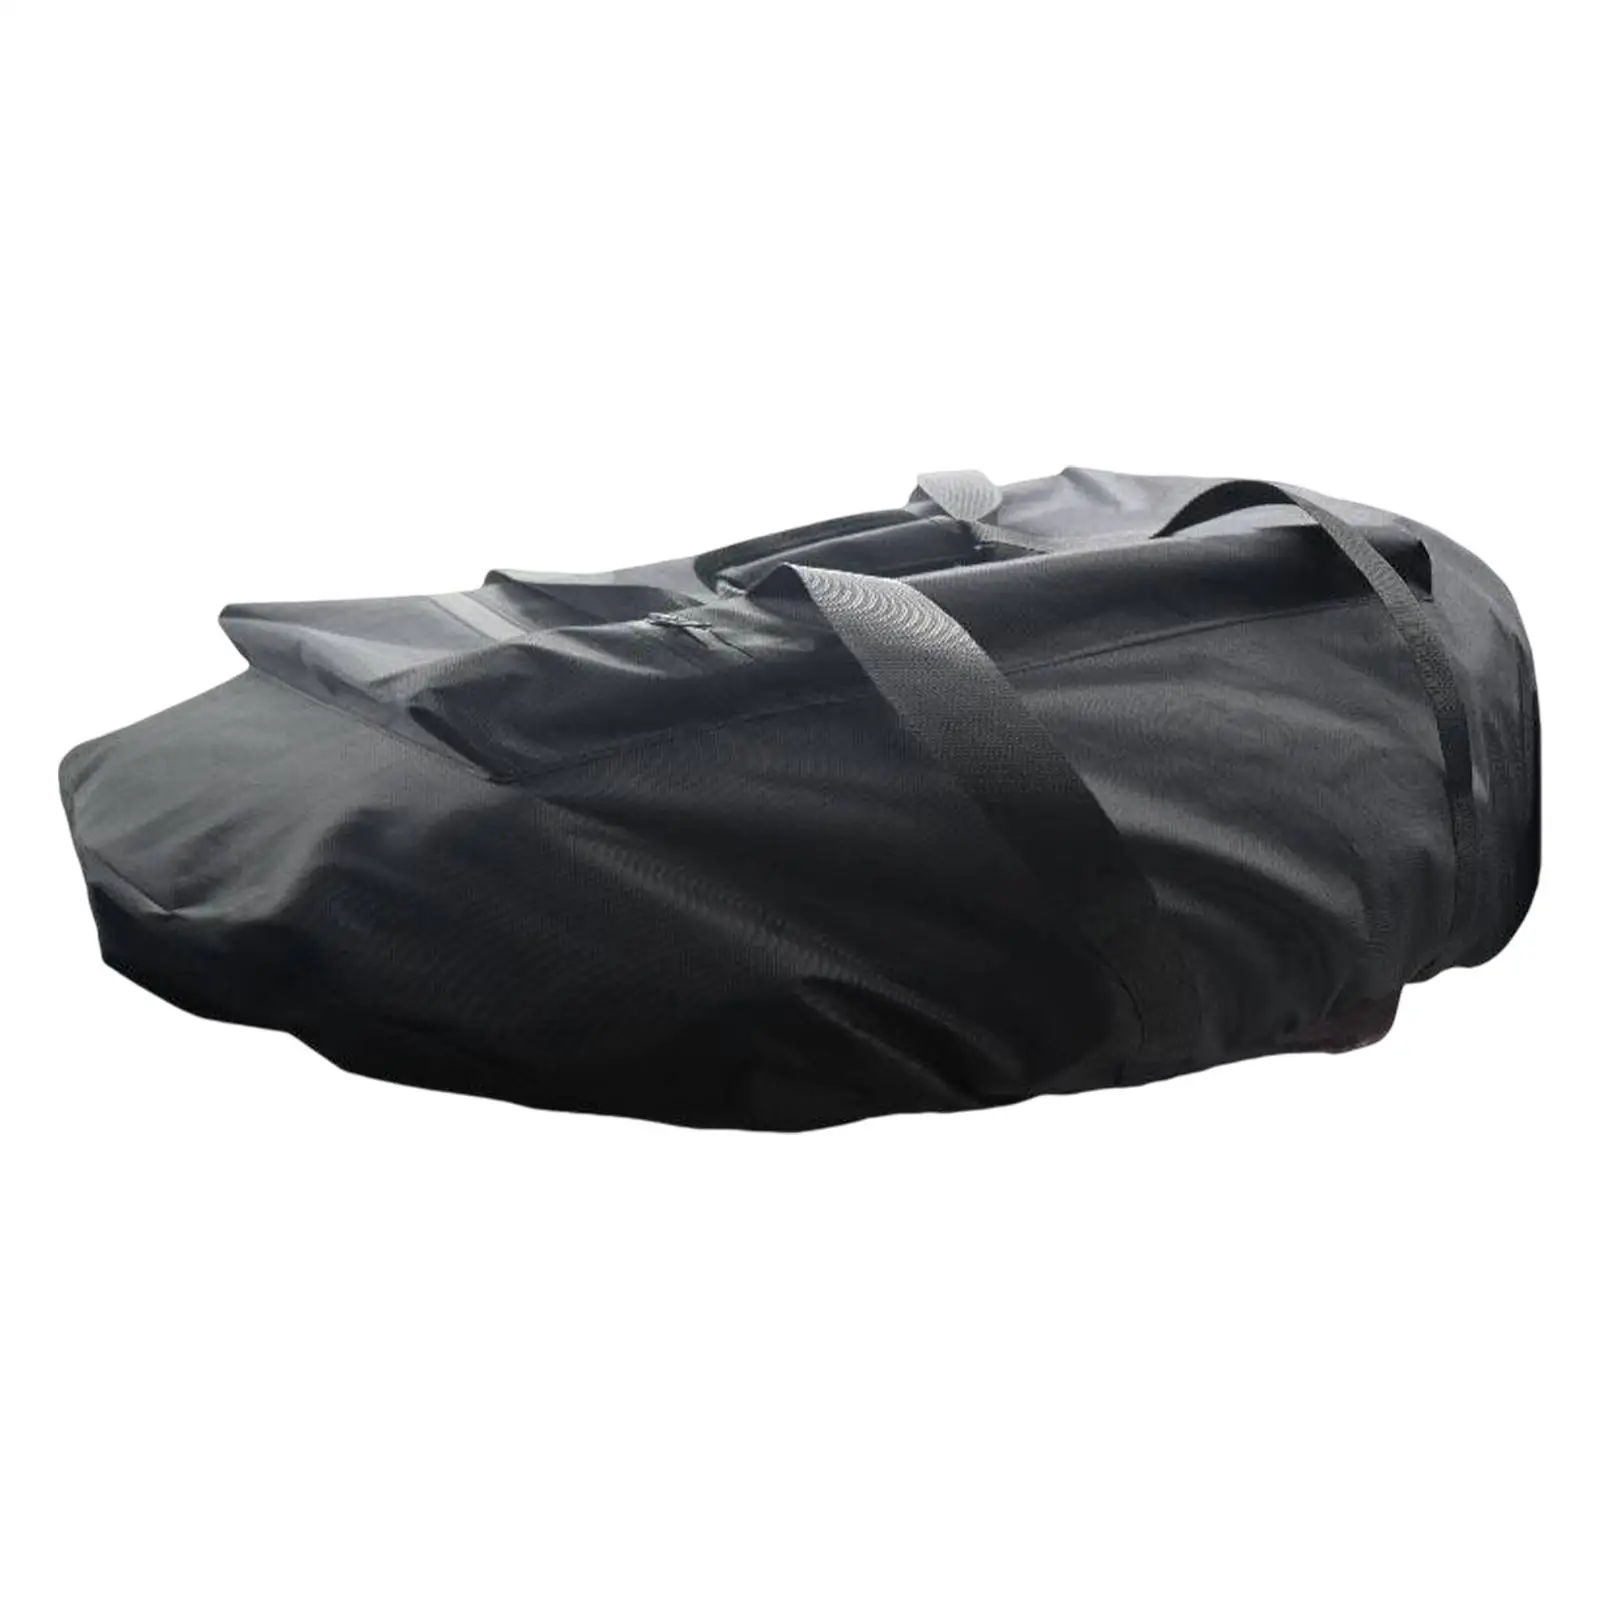 Pizza Oven Cover Protective Portable Durable Attachment Windproof High Strength Waterproof 600D Polyester Dustproof for Camping